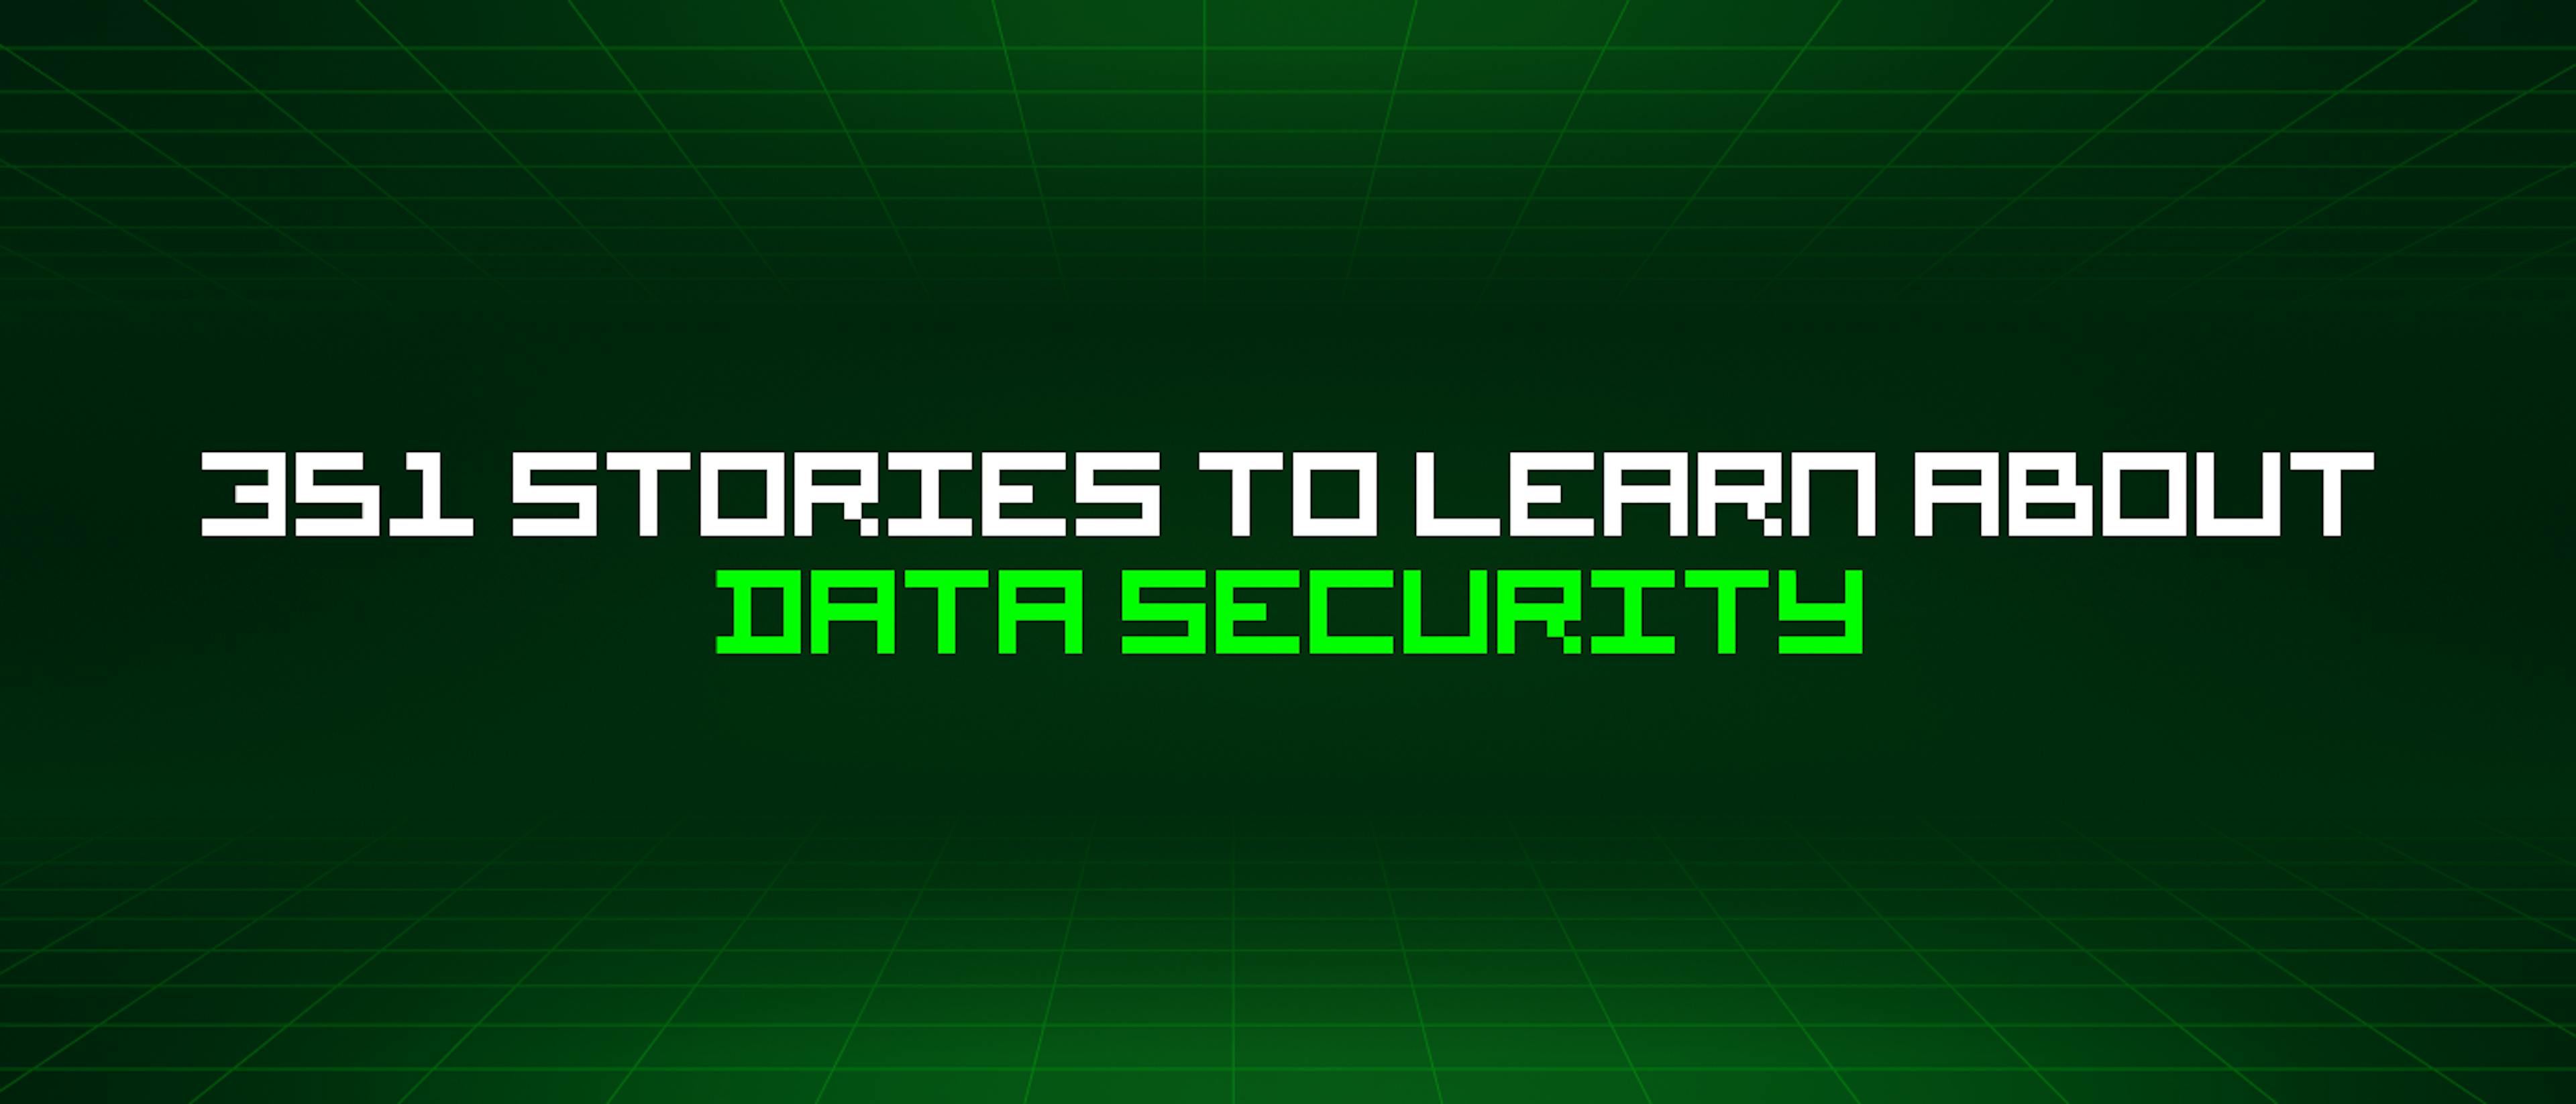 featured image - 351 Stories To Learn About Data Security